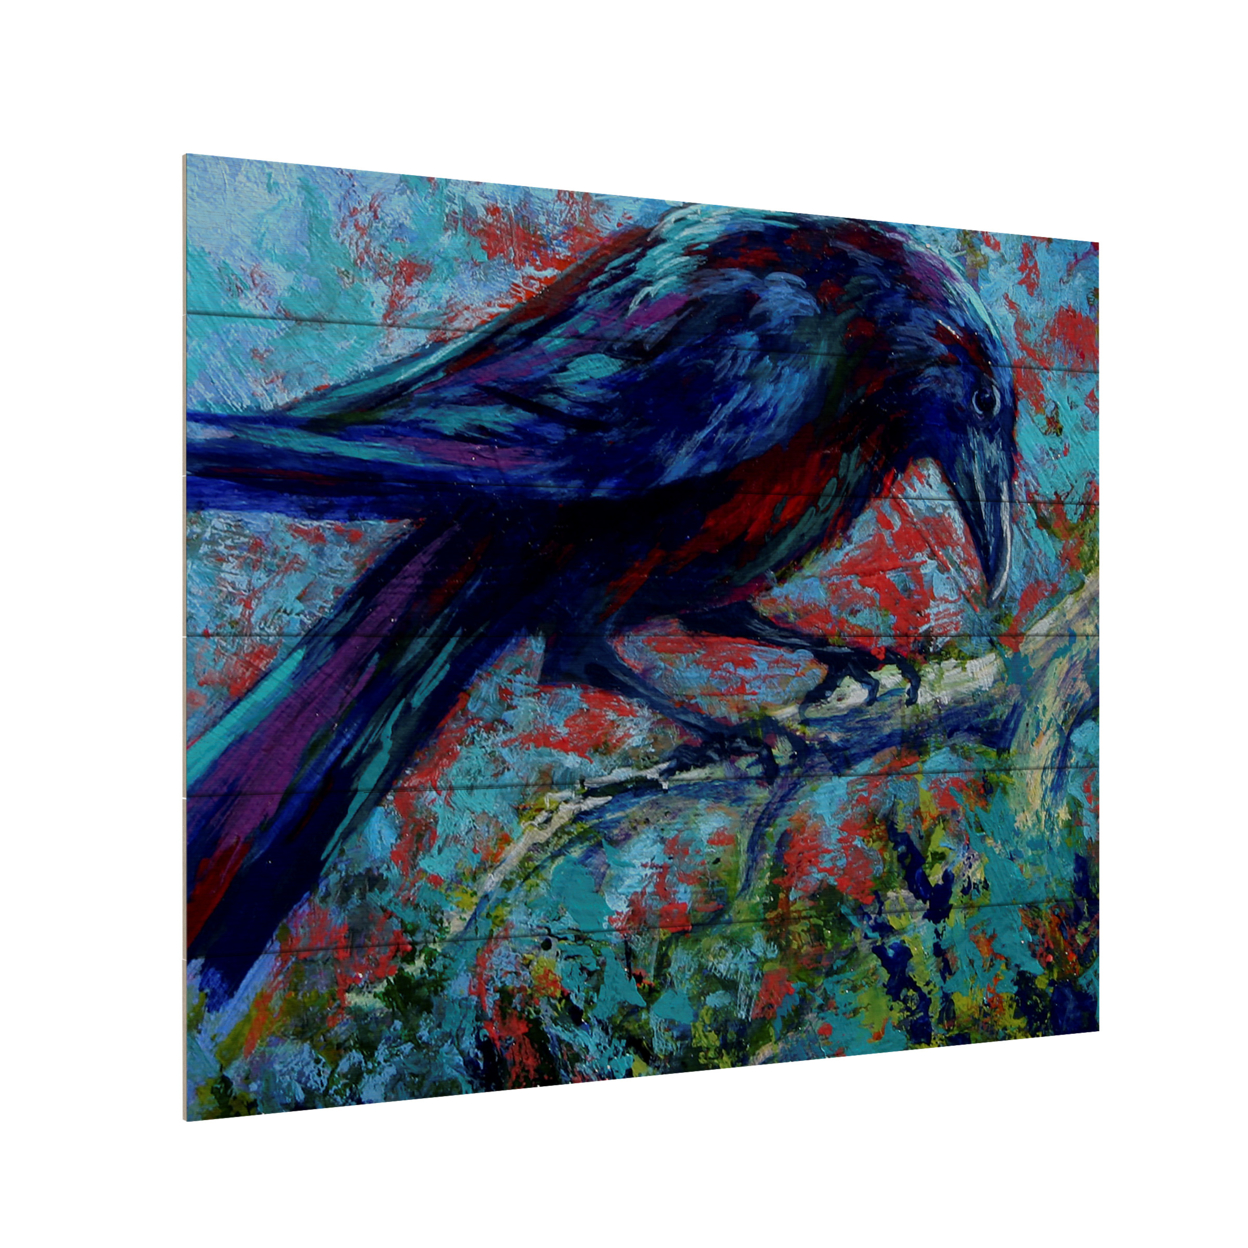 Wooden Slat Art 18 X 22 Inches Titled Raven Ready To Hang Home Decor Picture